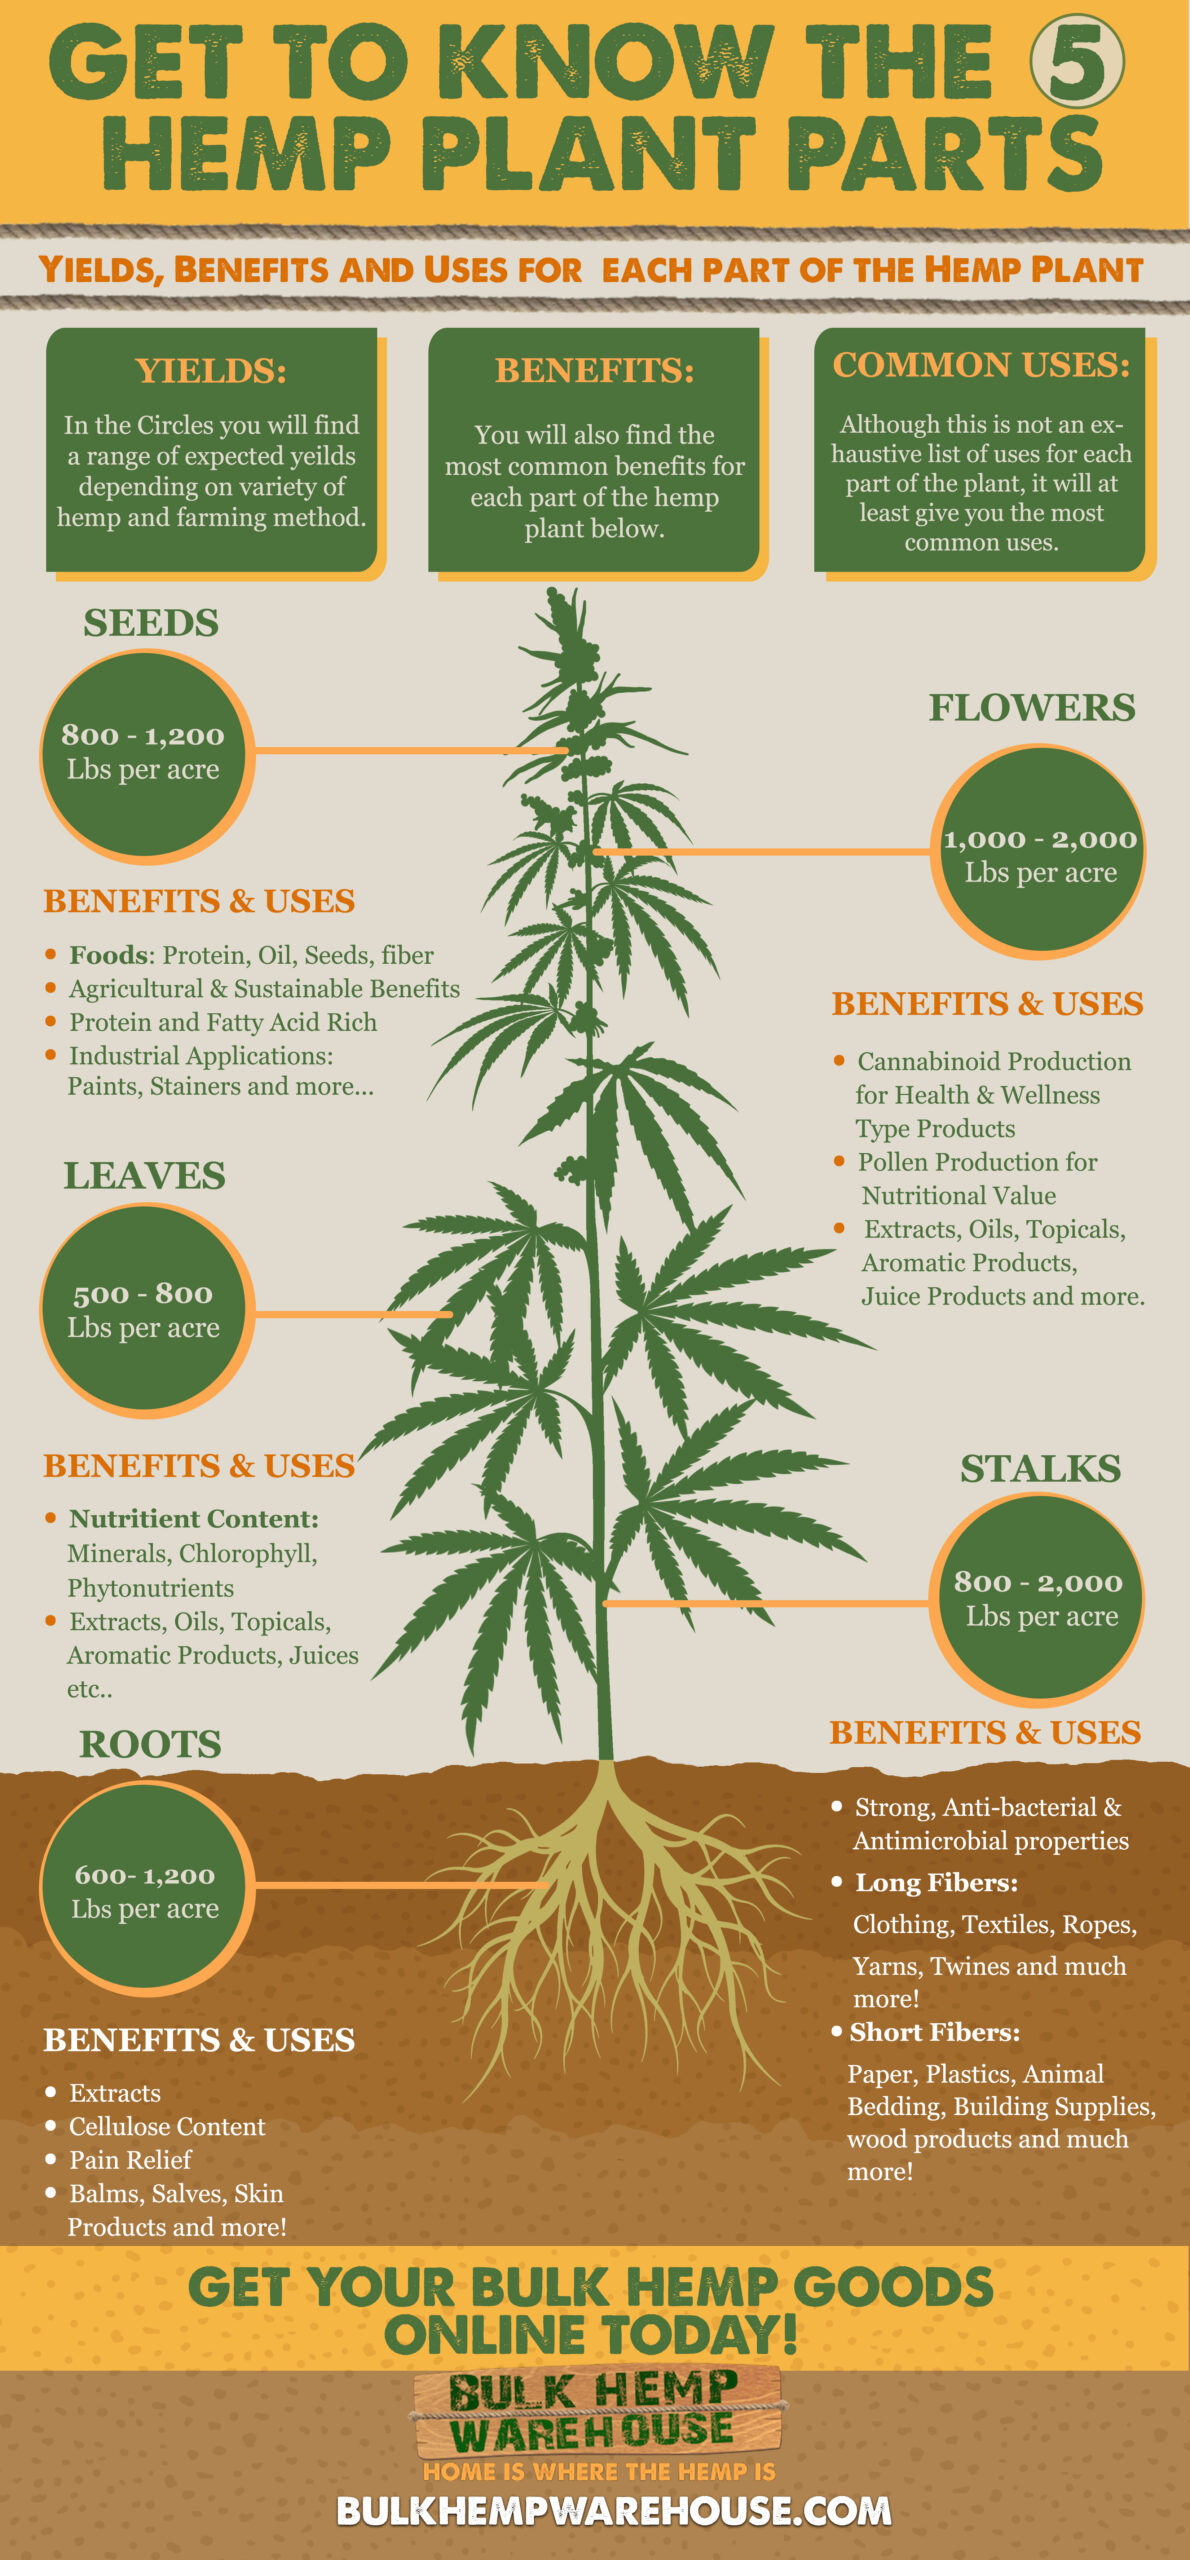 The 5 Parts of the Hemp Plant Infographic Poster